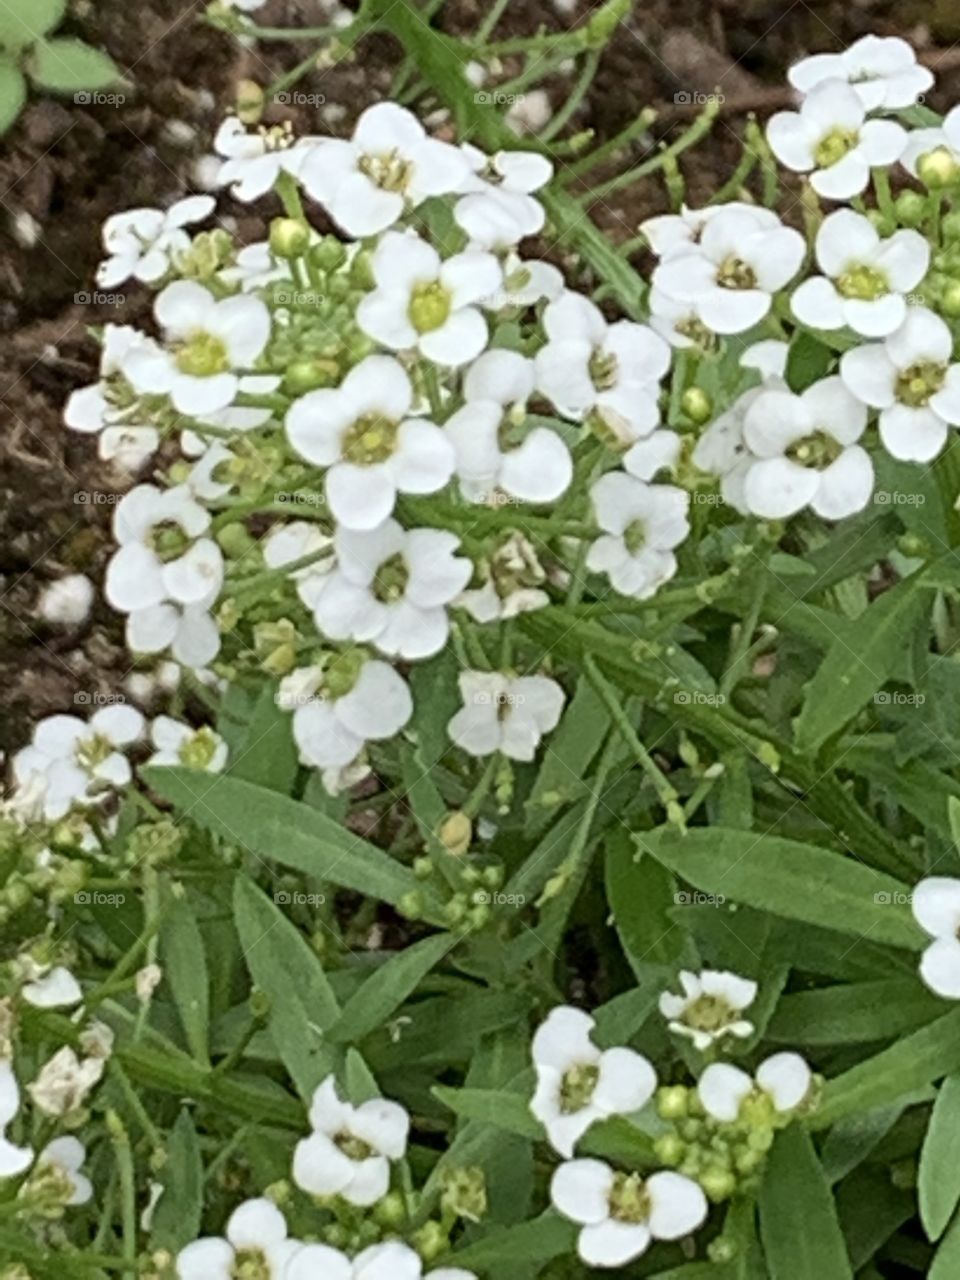 Some of my white phlox flowers